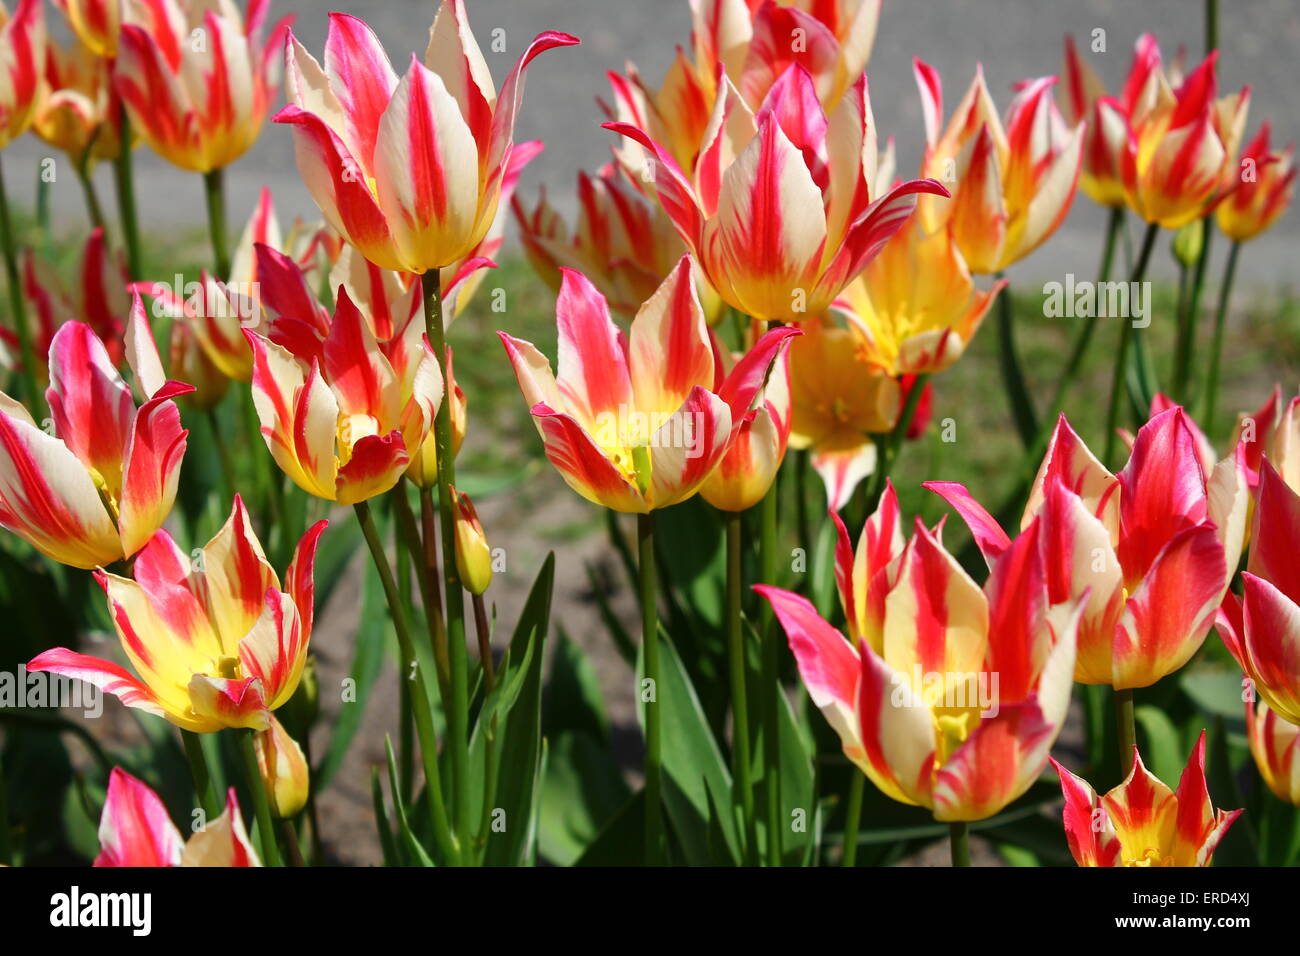 beautiful color  like a burning fire sort of tulips in full spring bloom Stock Photo